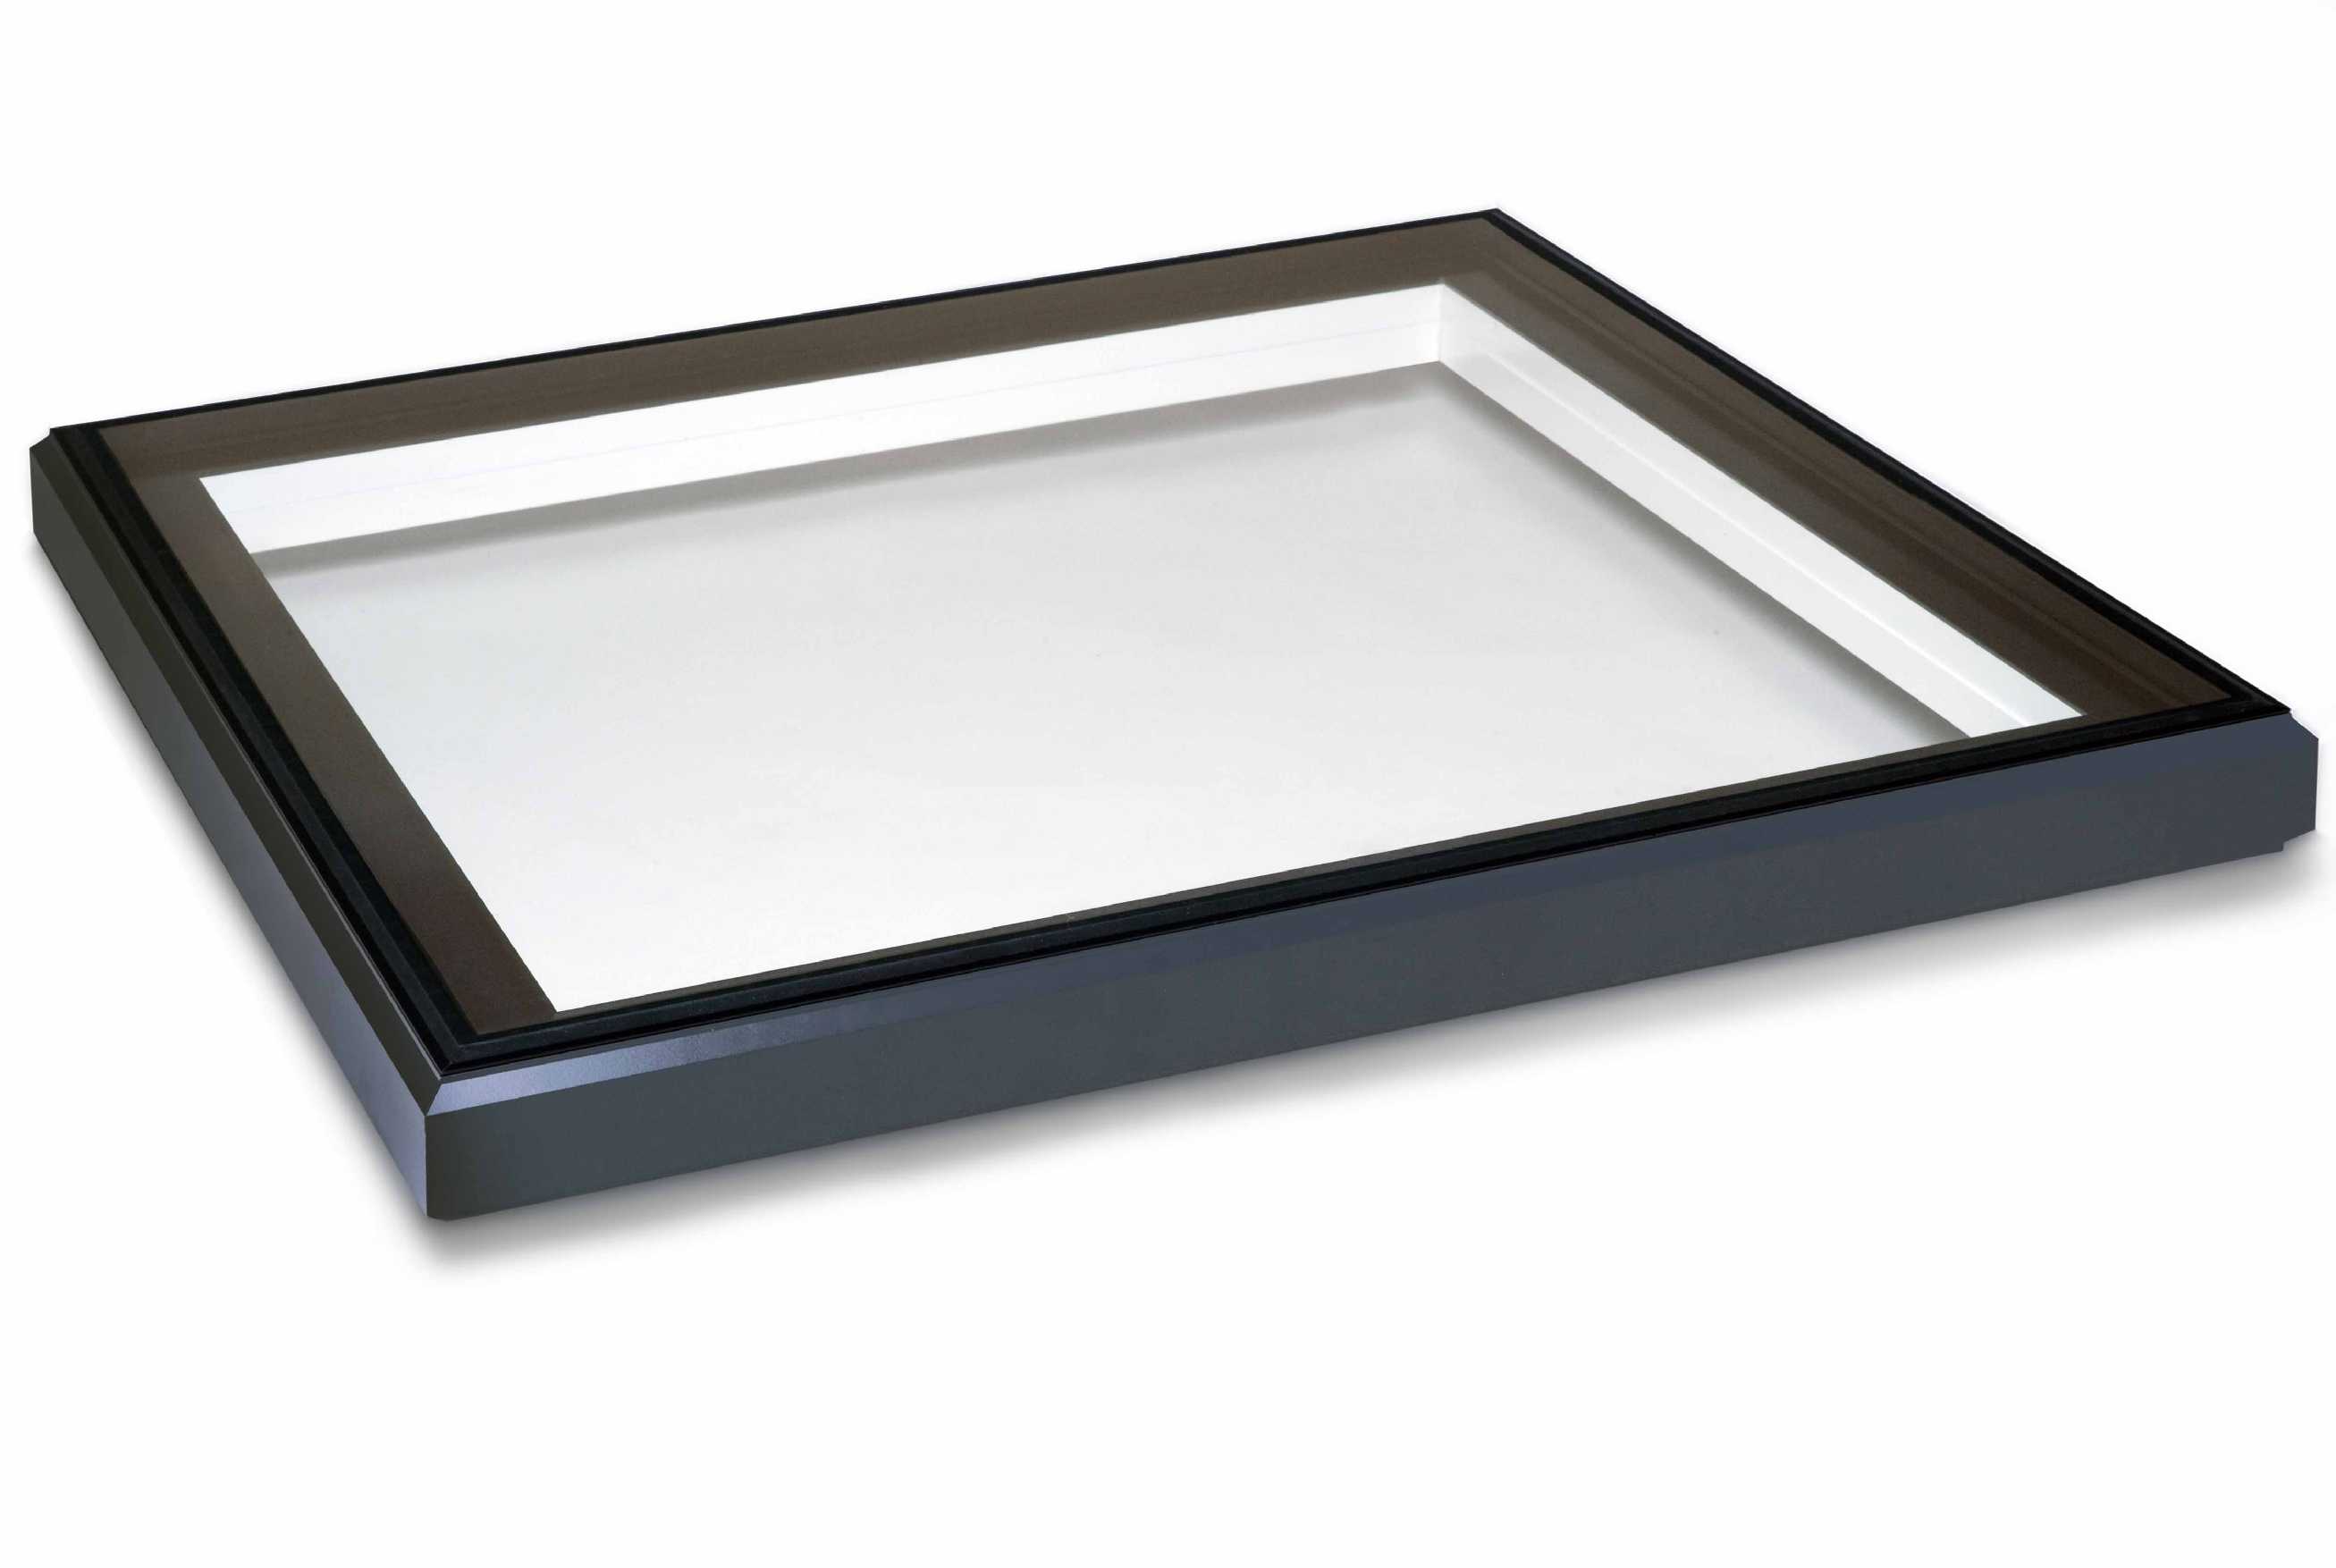 Buy EcoGard Flat Roof light, Double Glazed, Fixed, 1,000mm x 2,000mm online today